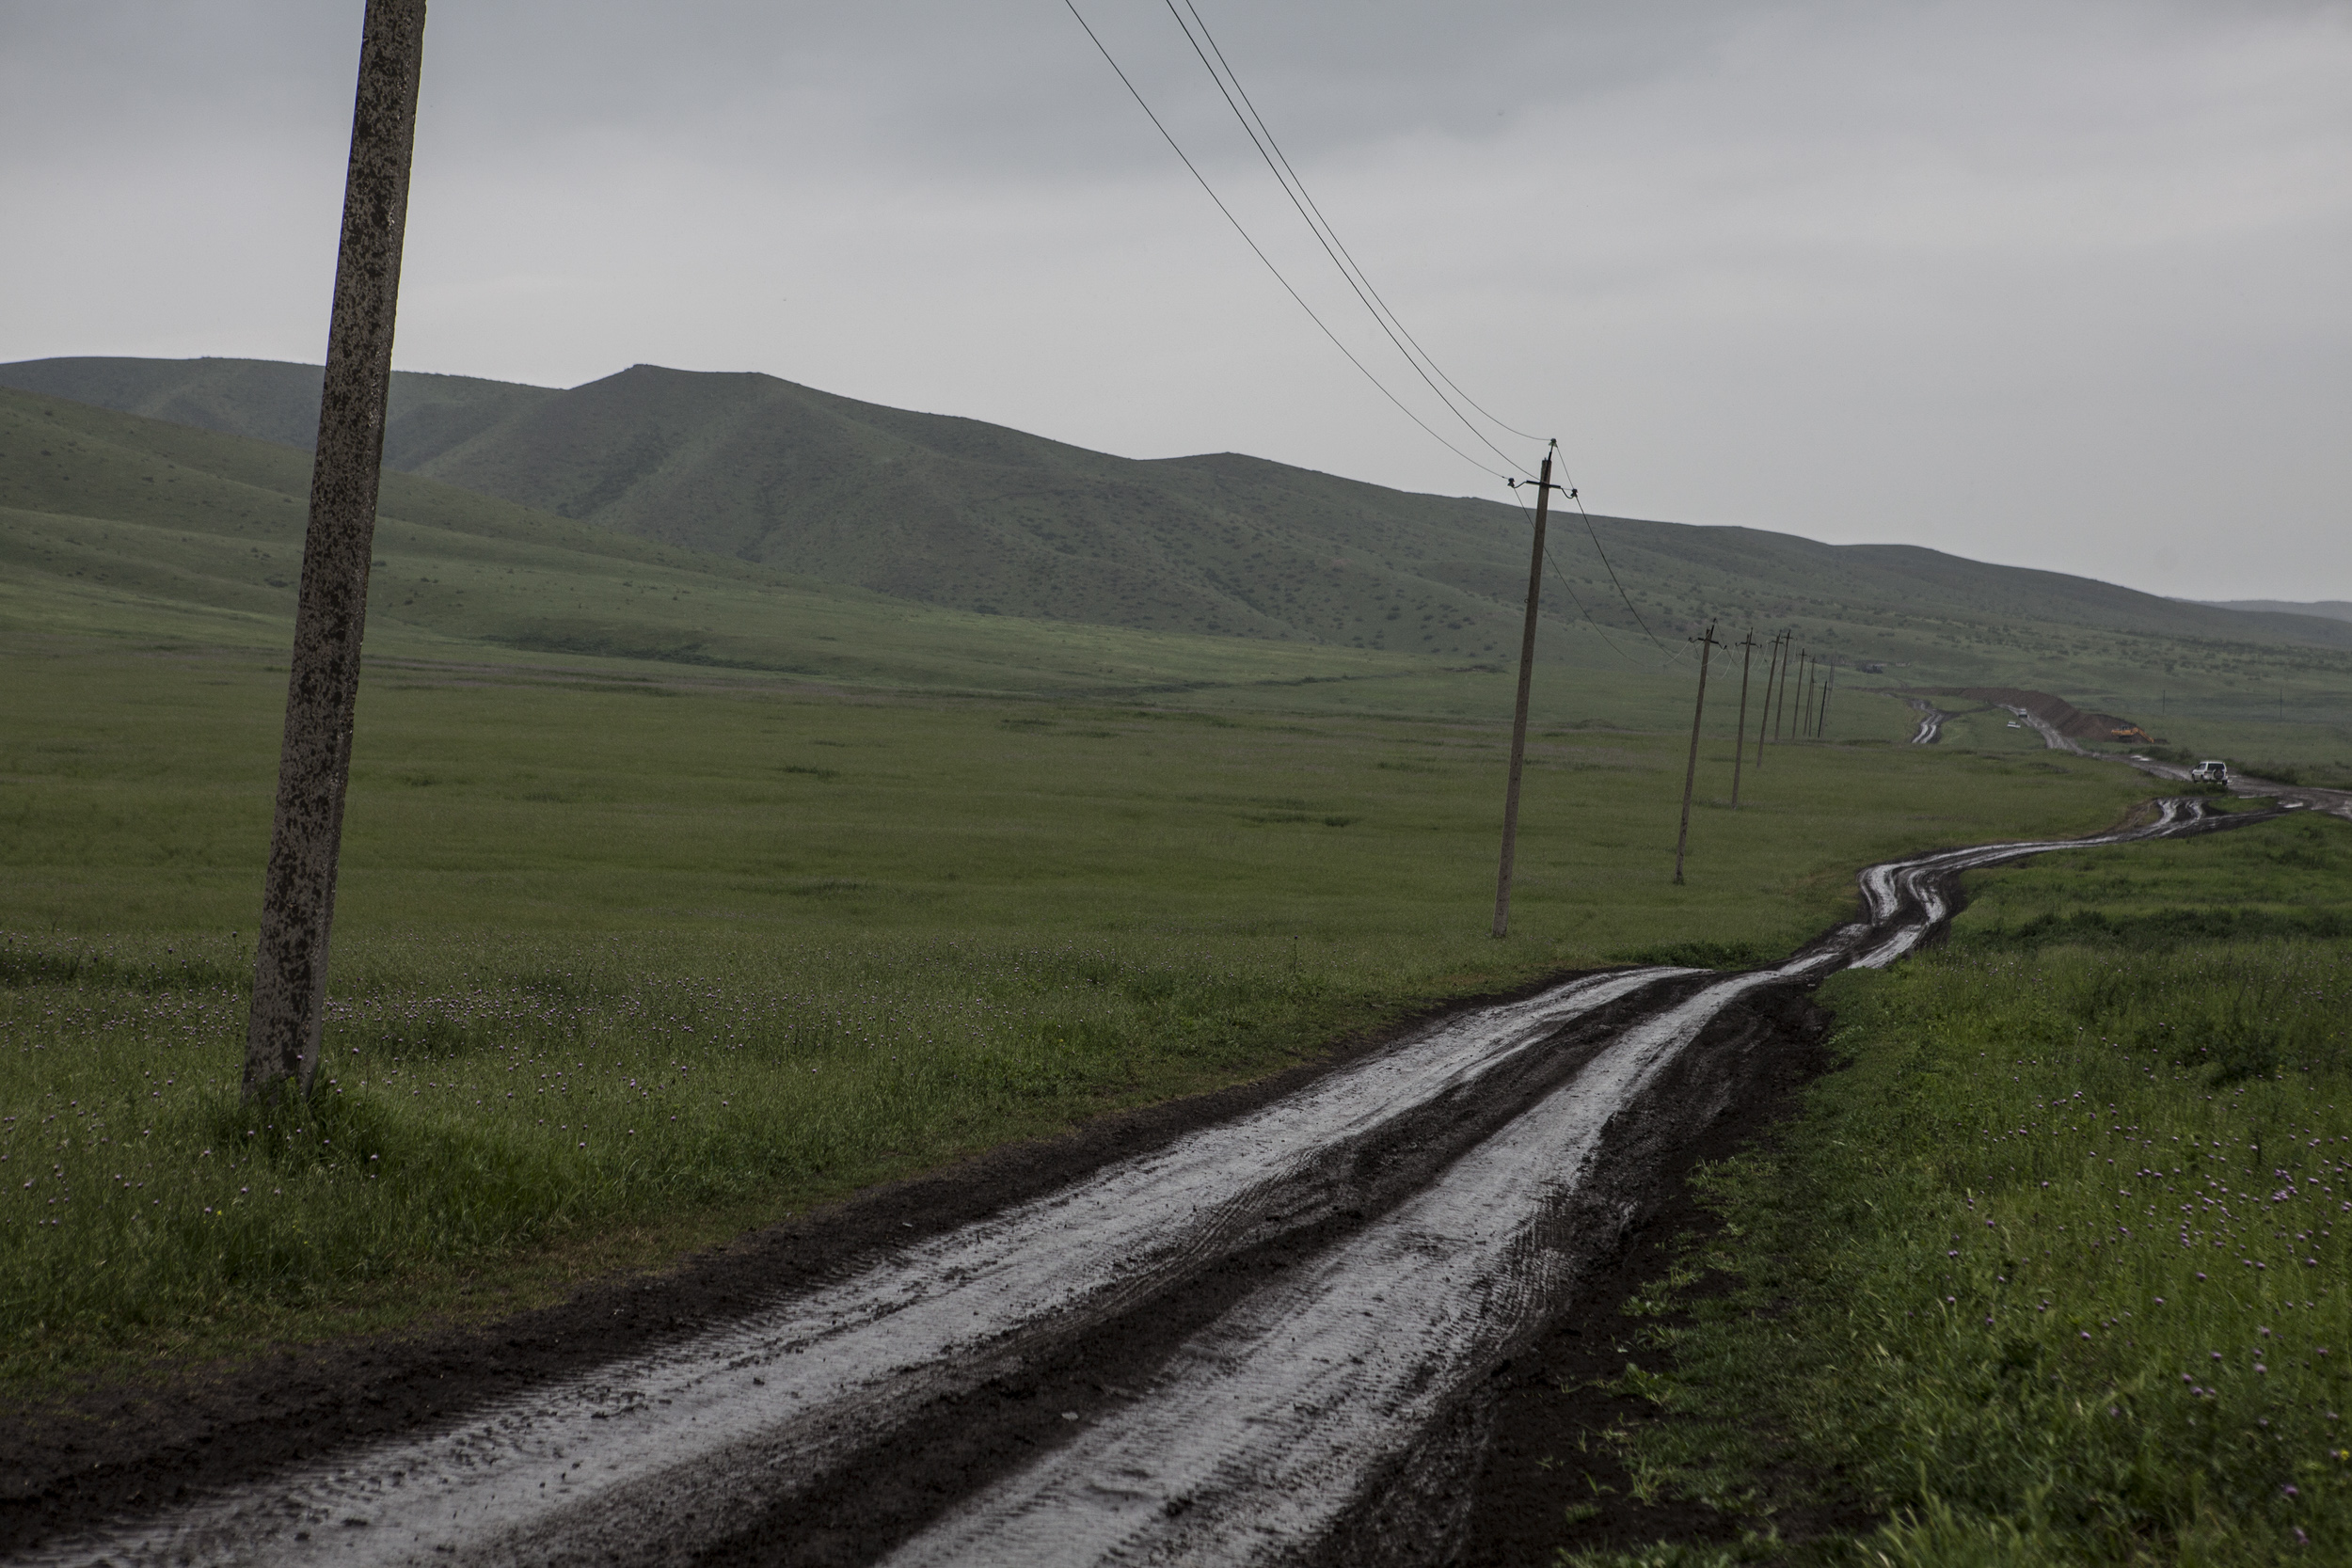  The remainder of this gallery are photographs from April 30; the northern borders of the Republic of Nagorno Karabakh where soldiers remain to protect. 